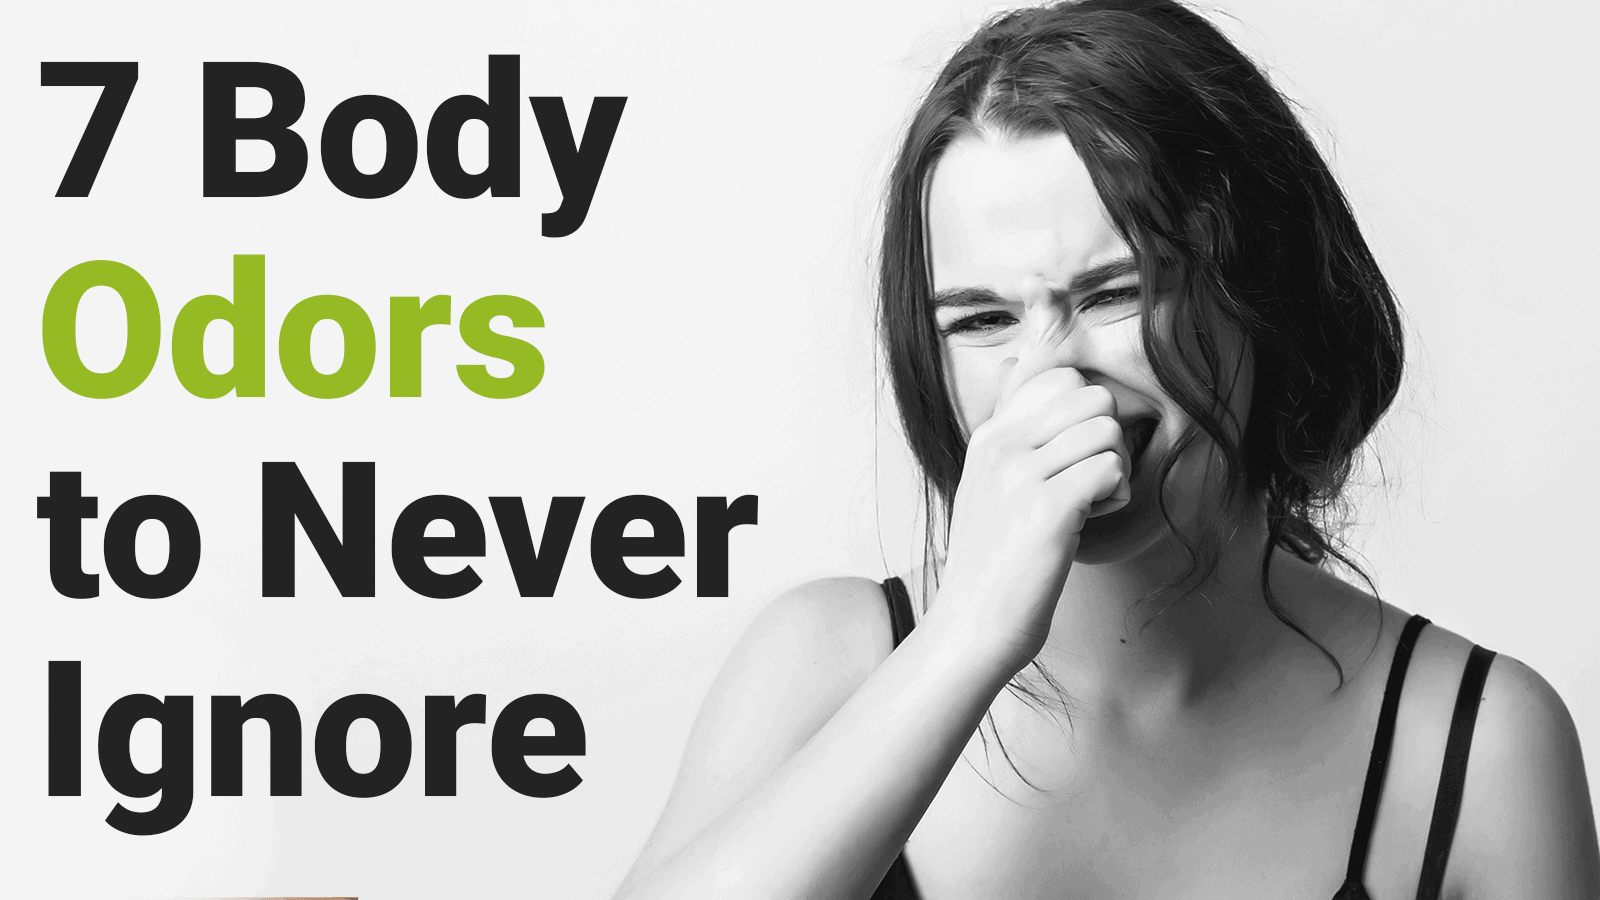 7 Body Odors to Never Ignore